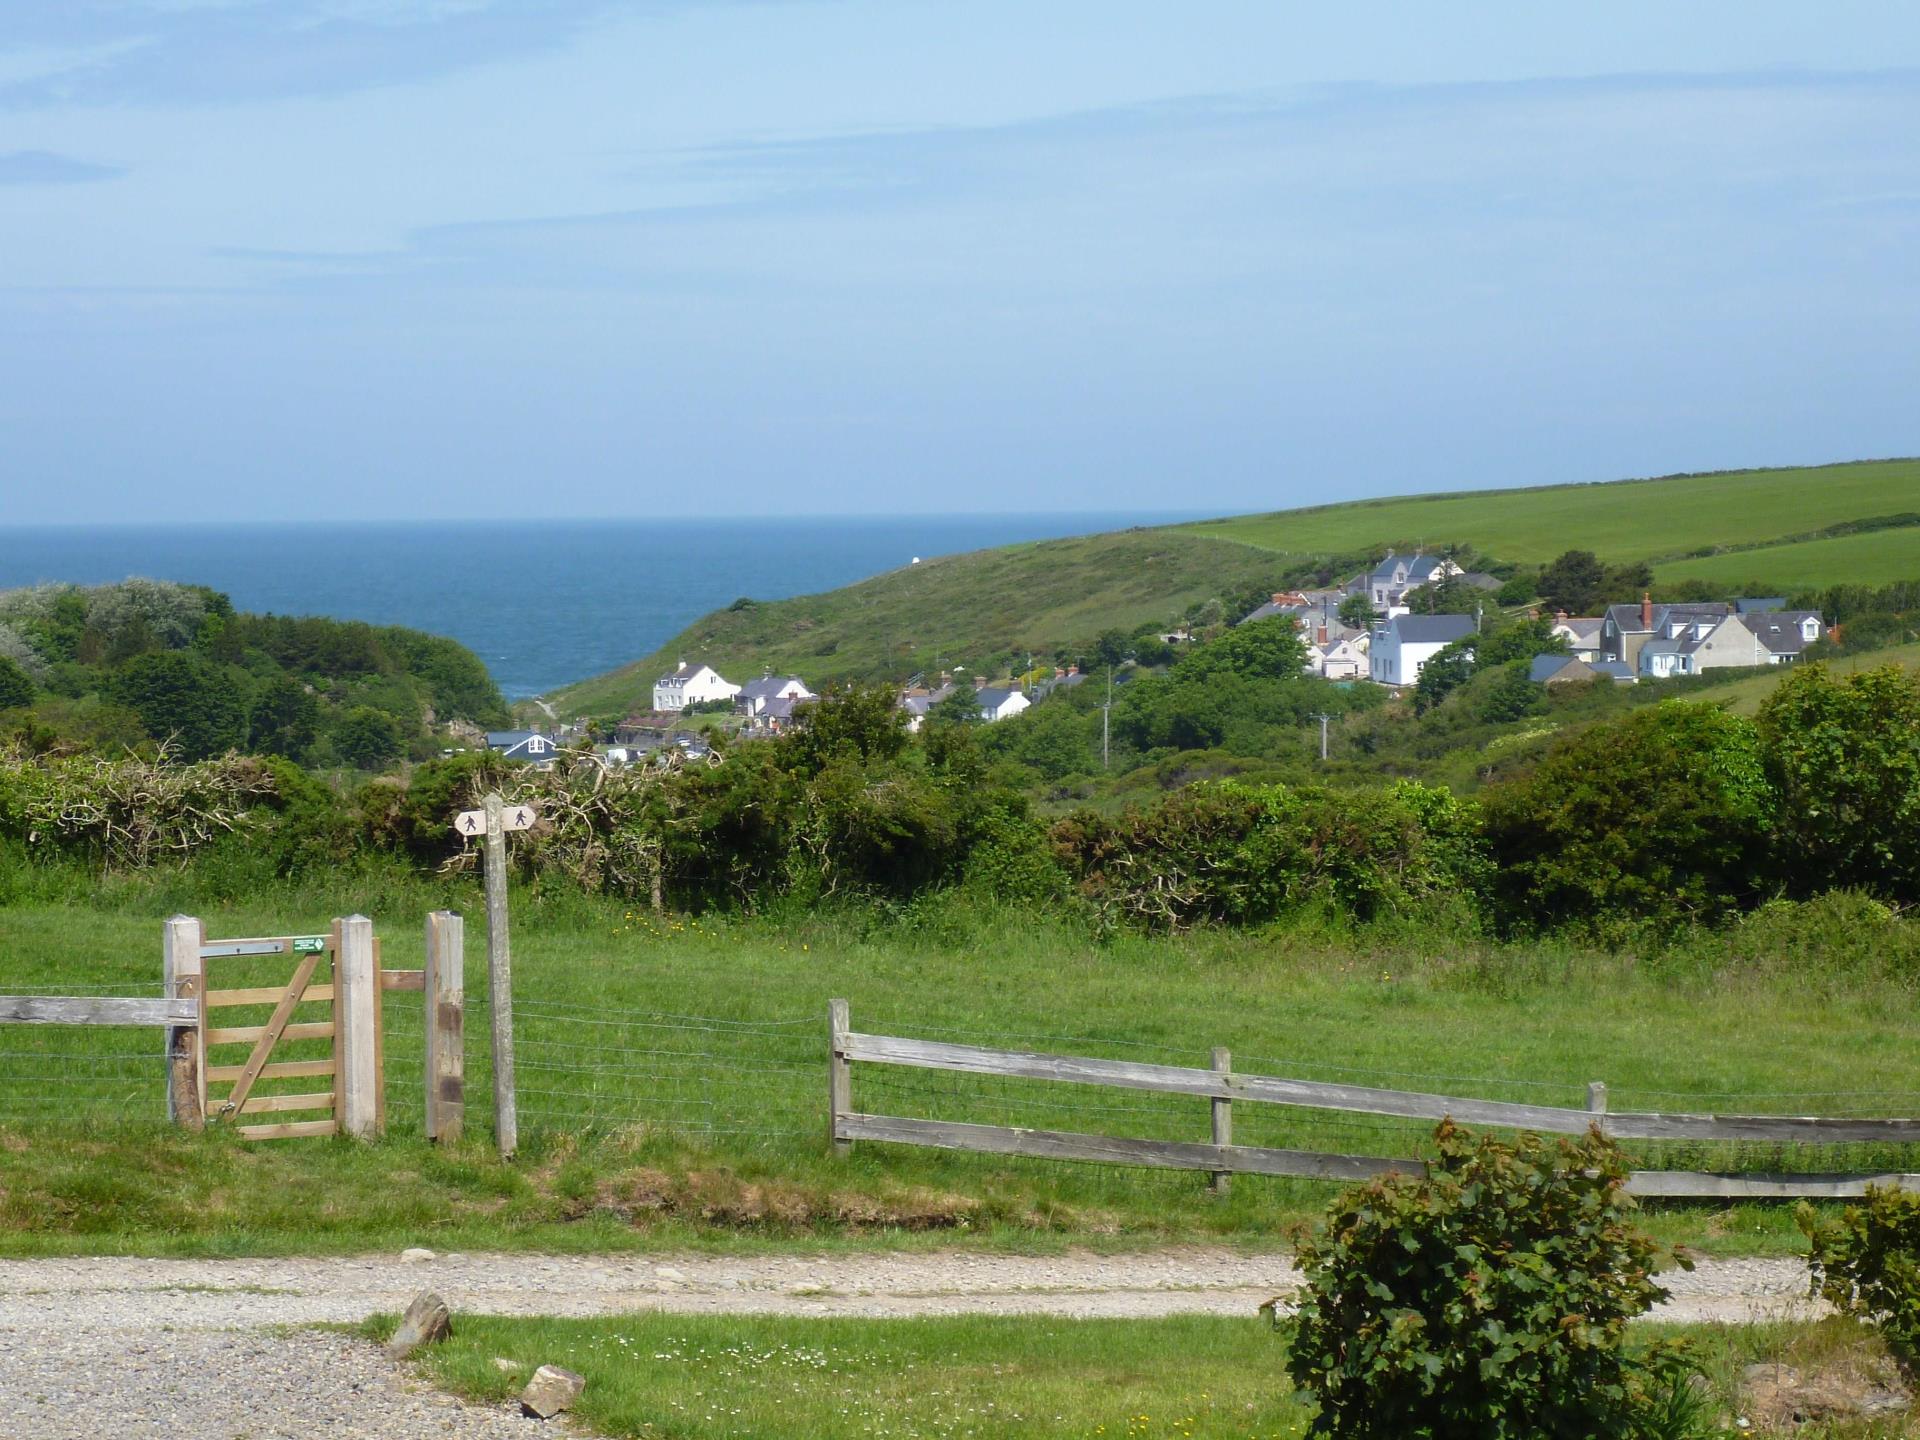 Walk from Felindre down to Porthgain